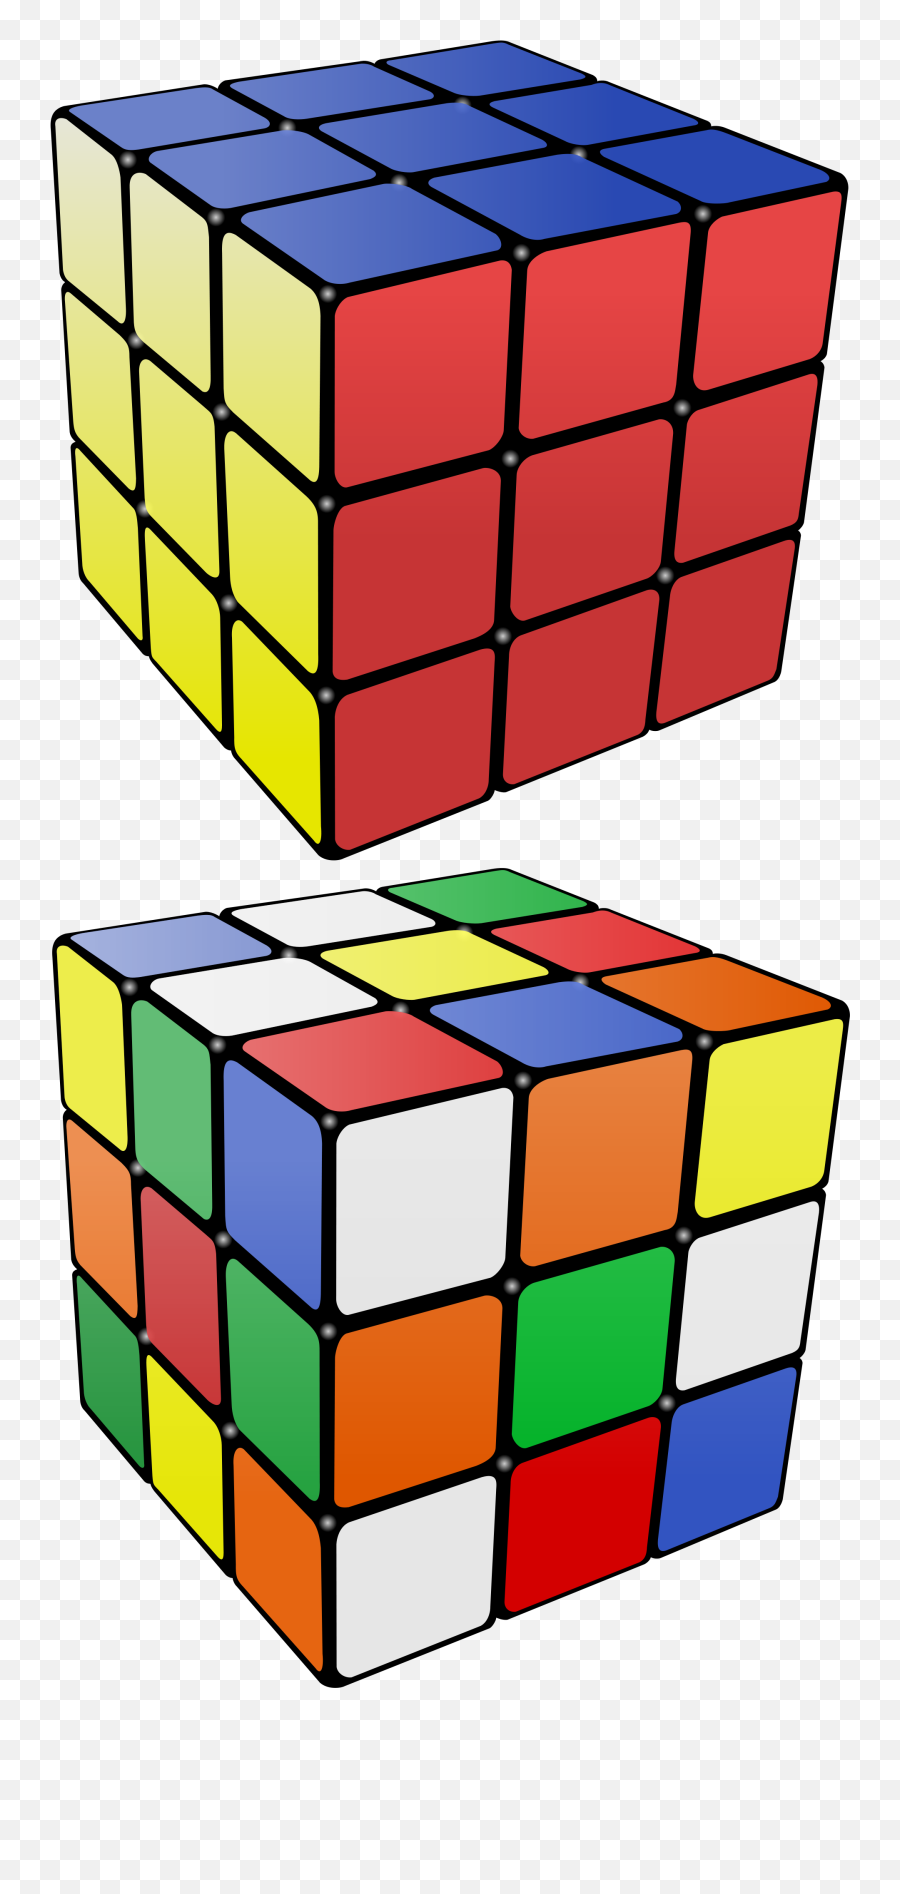 Rubiks Cube Resolved - Rubix Cube Coloring Page Png,Rubik's Cube Png